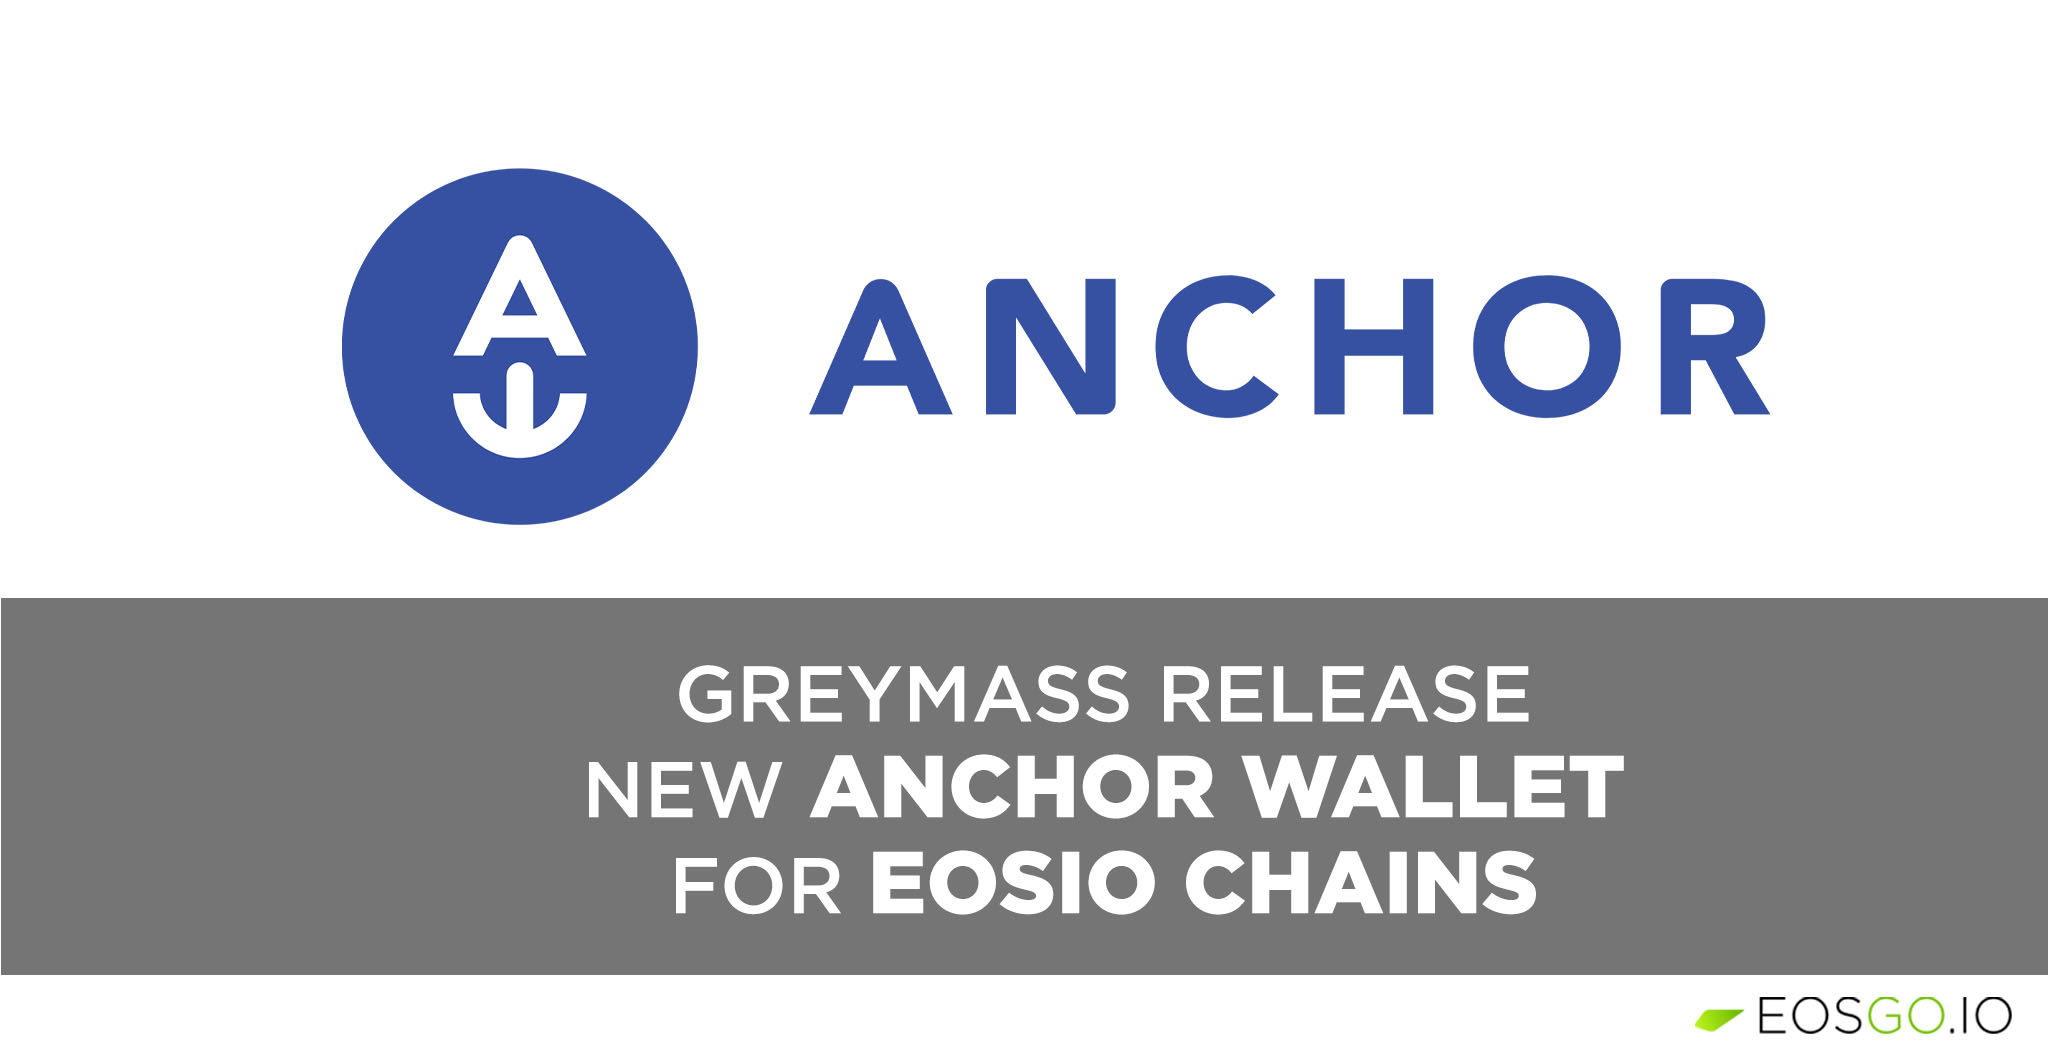 Greymass release new Anchor wallet for EOSIO chains